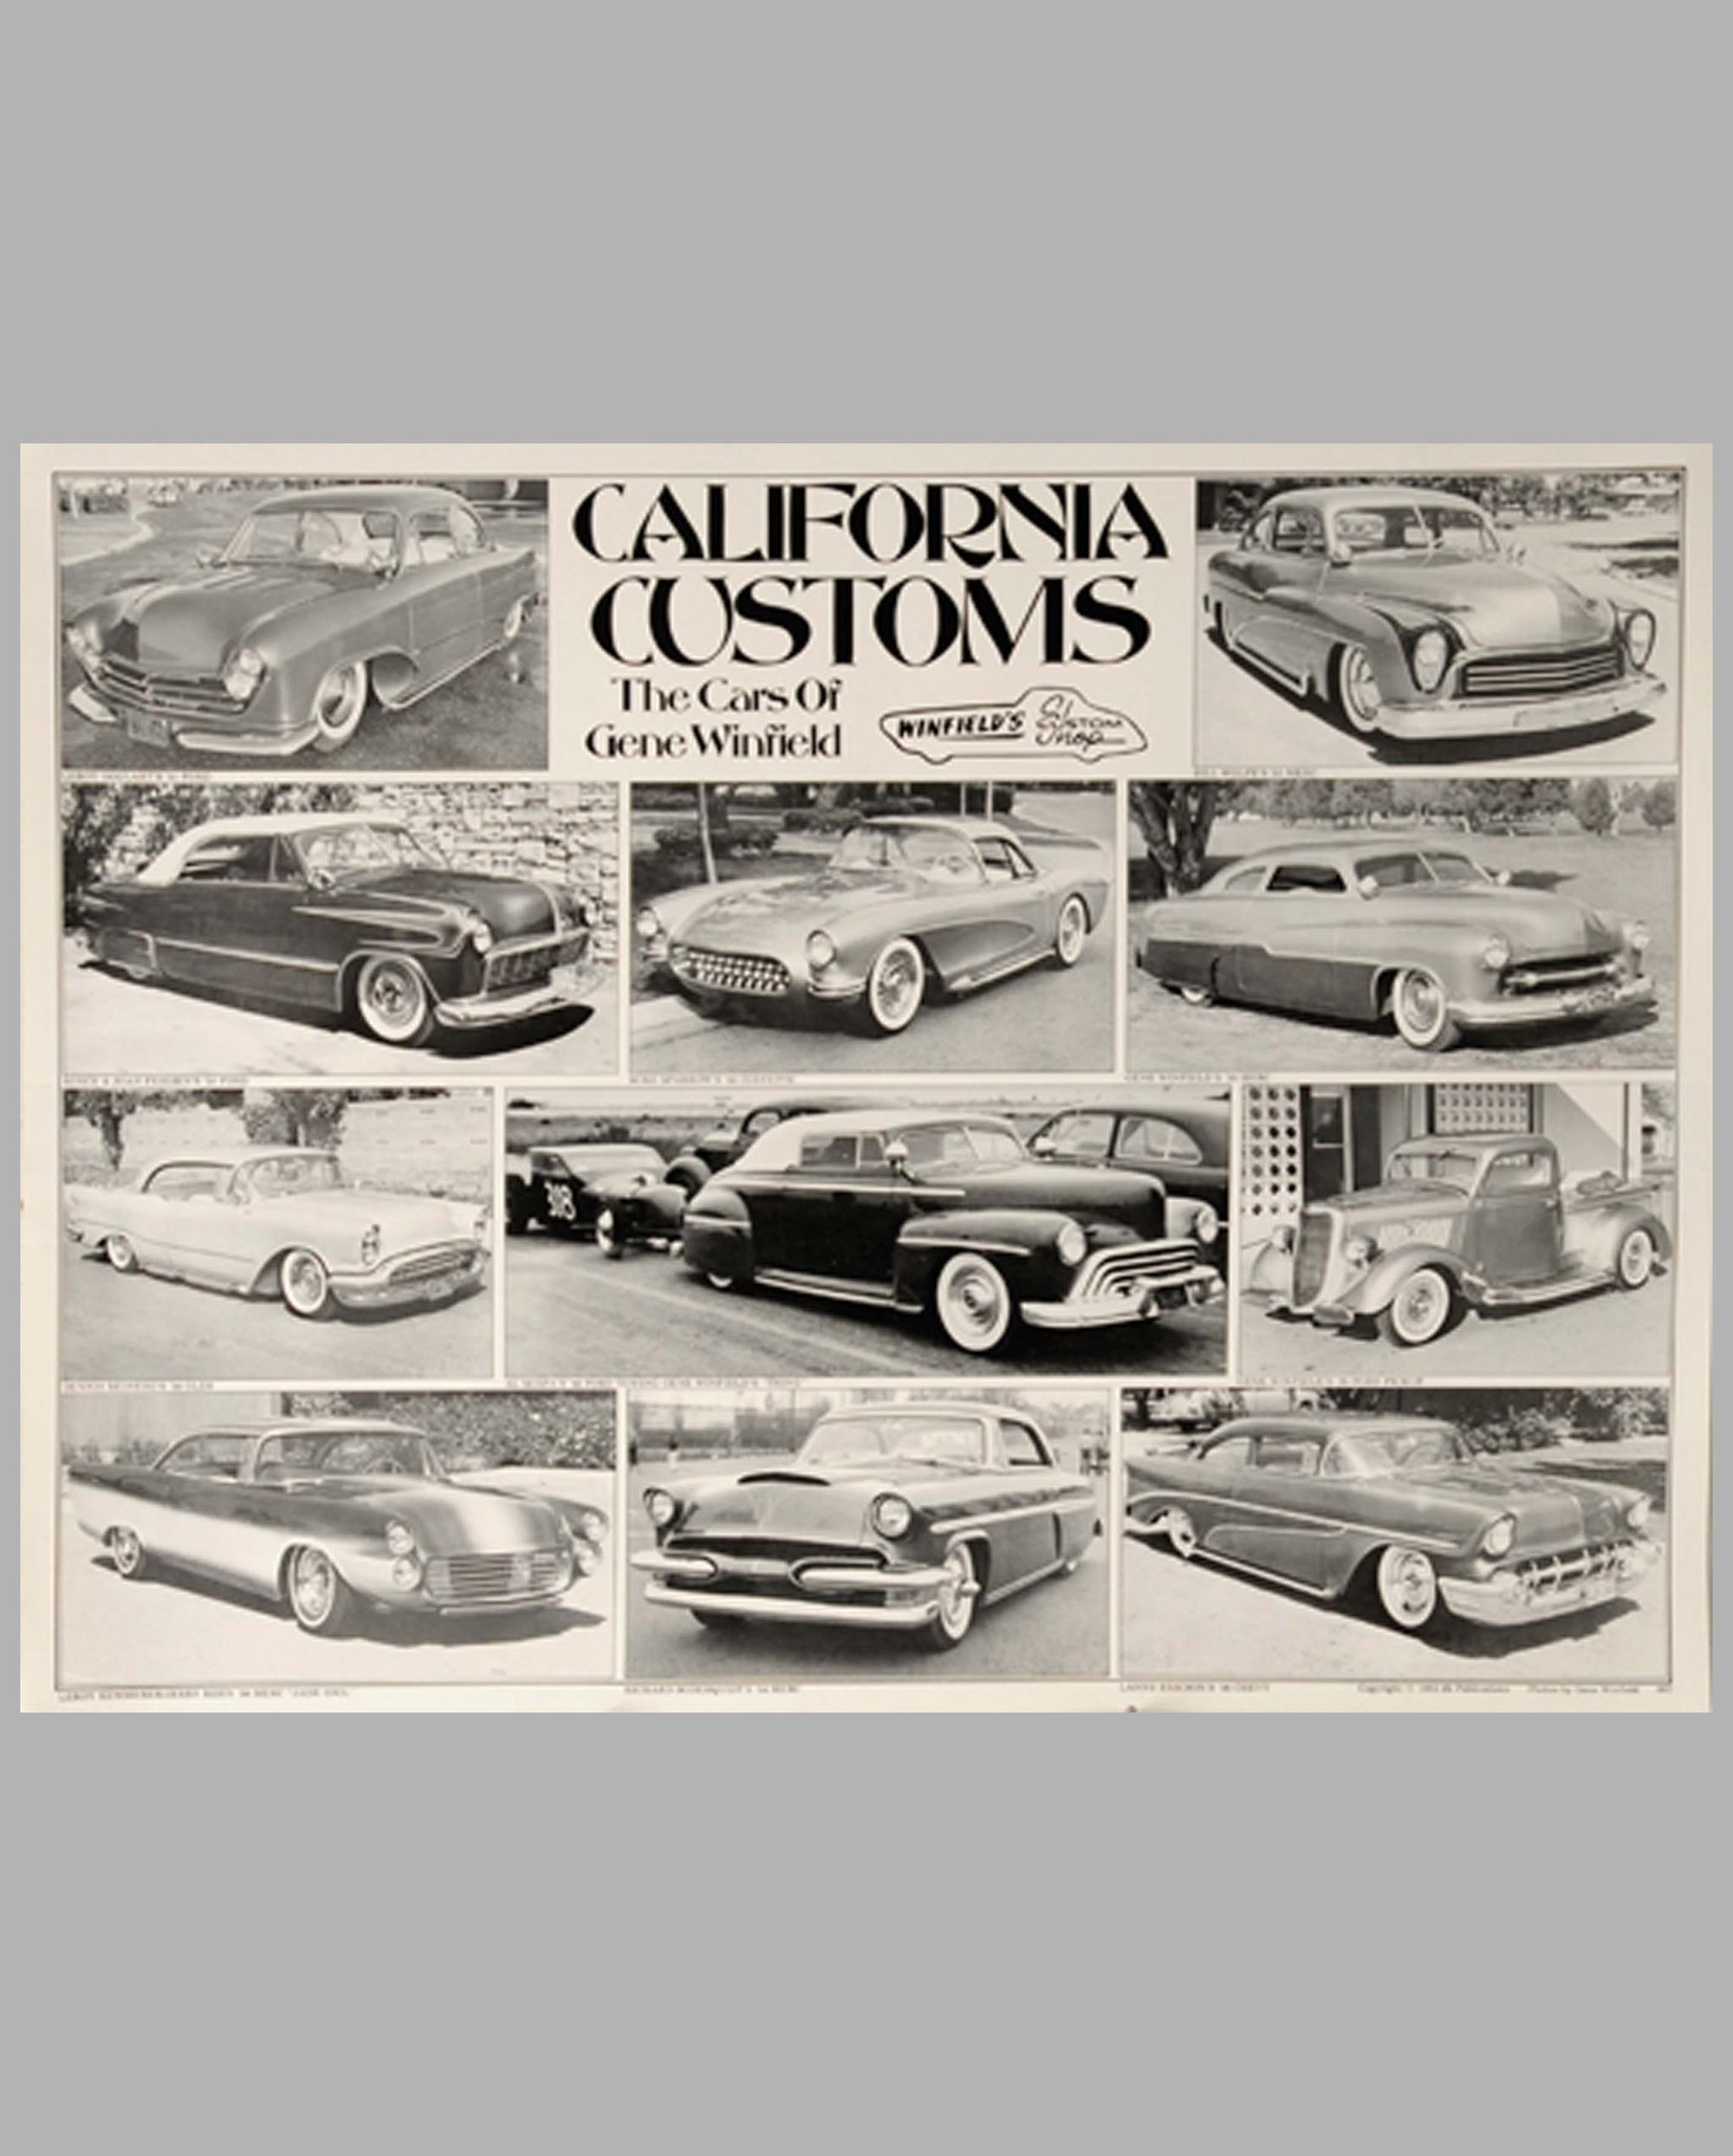 3 California Customs posters by db Publications (Dean Batchelor), page 1